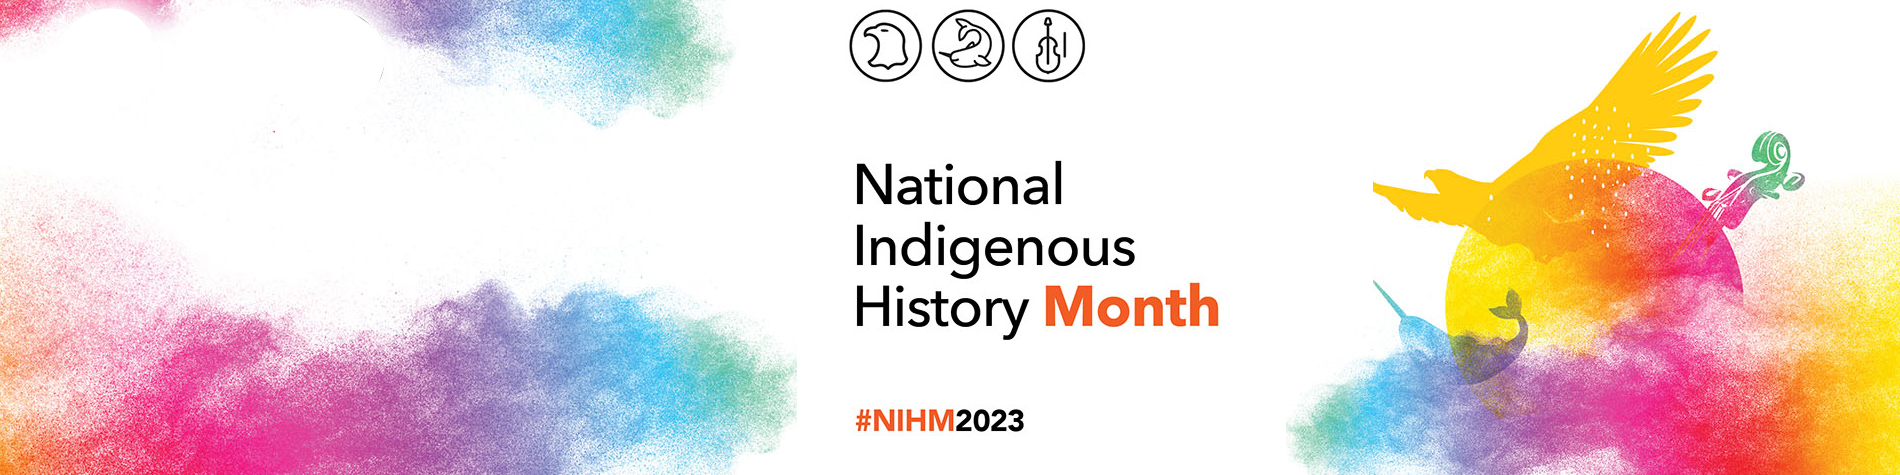 <p class="slider-title">June is National Indigenous History Month</p><div class="banner-line"></div><p class="slider-subtitle">June is National Indigenous History Month, a time to learn about the unique cultures, traditions and experiences of First Nations, Inuit and Metis.</p> <a style="pointer-events:all" class=AEBannerMoreLink href="https://cbe.ab.ca/news-centre/Pages/june-is-national-indigenous-history-month-2023.aspx">Read More</a>